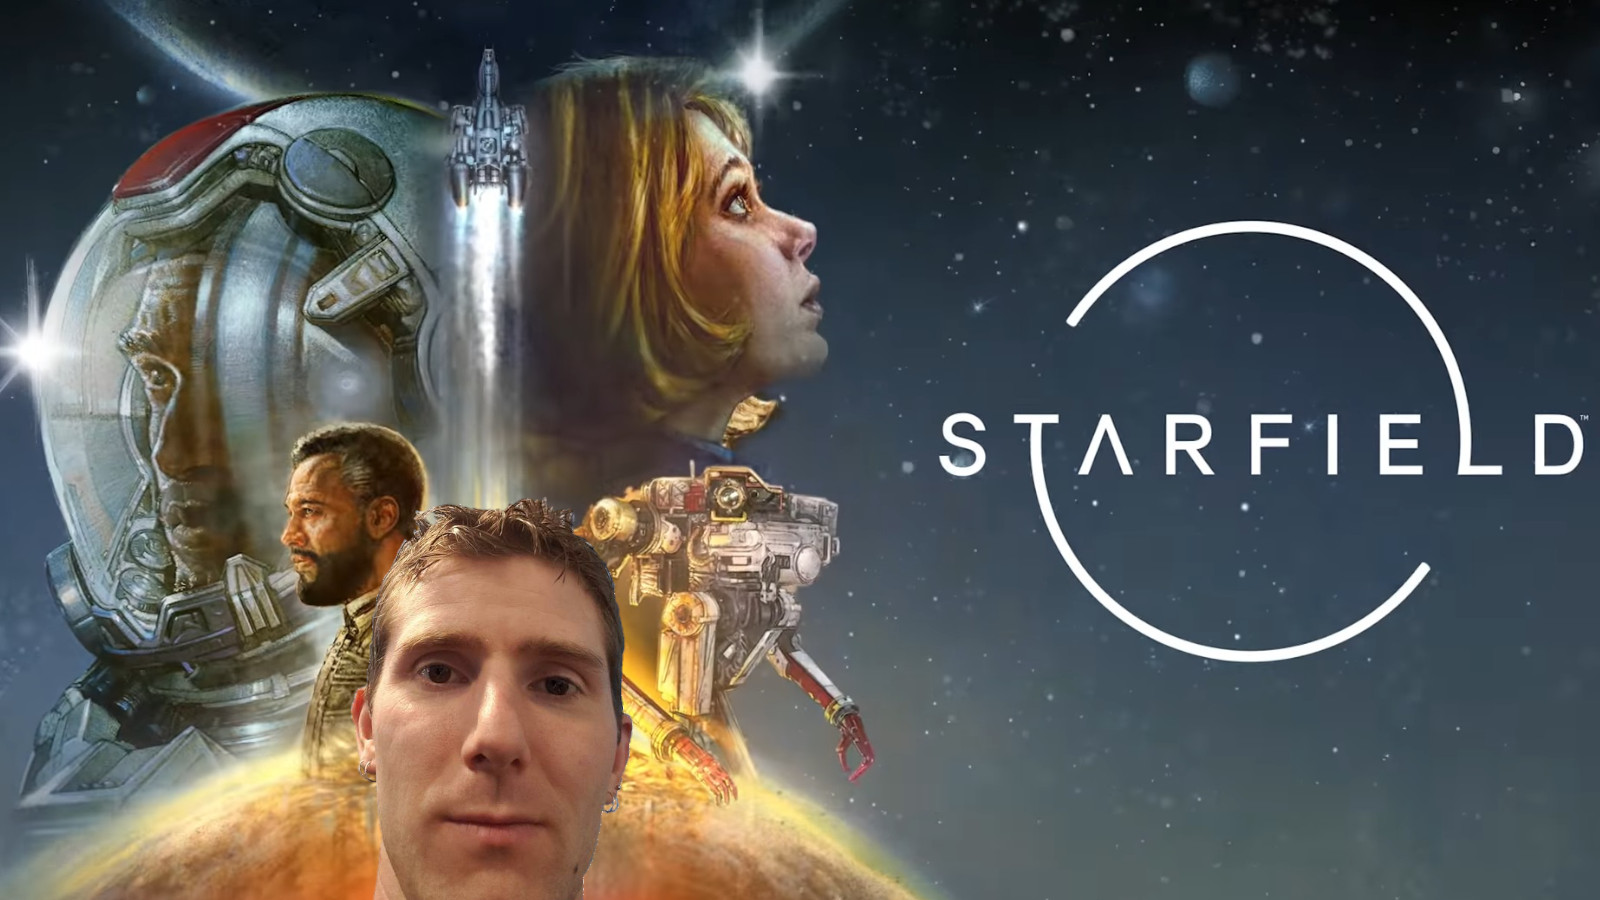 LinusTechTips left “enraged” by Starfield’s “jank” PC port